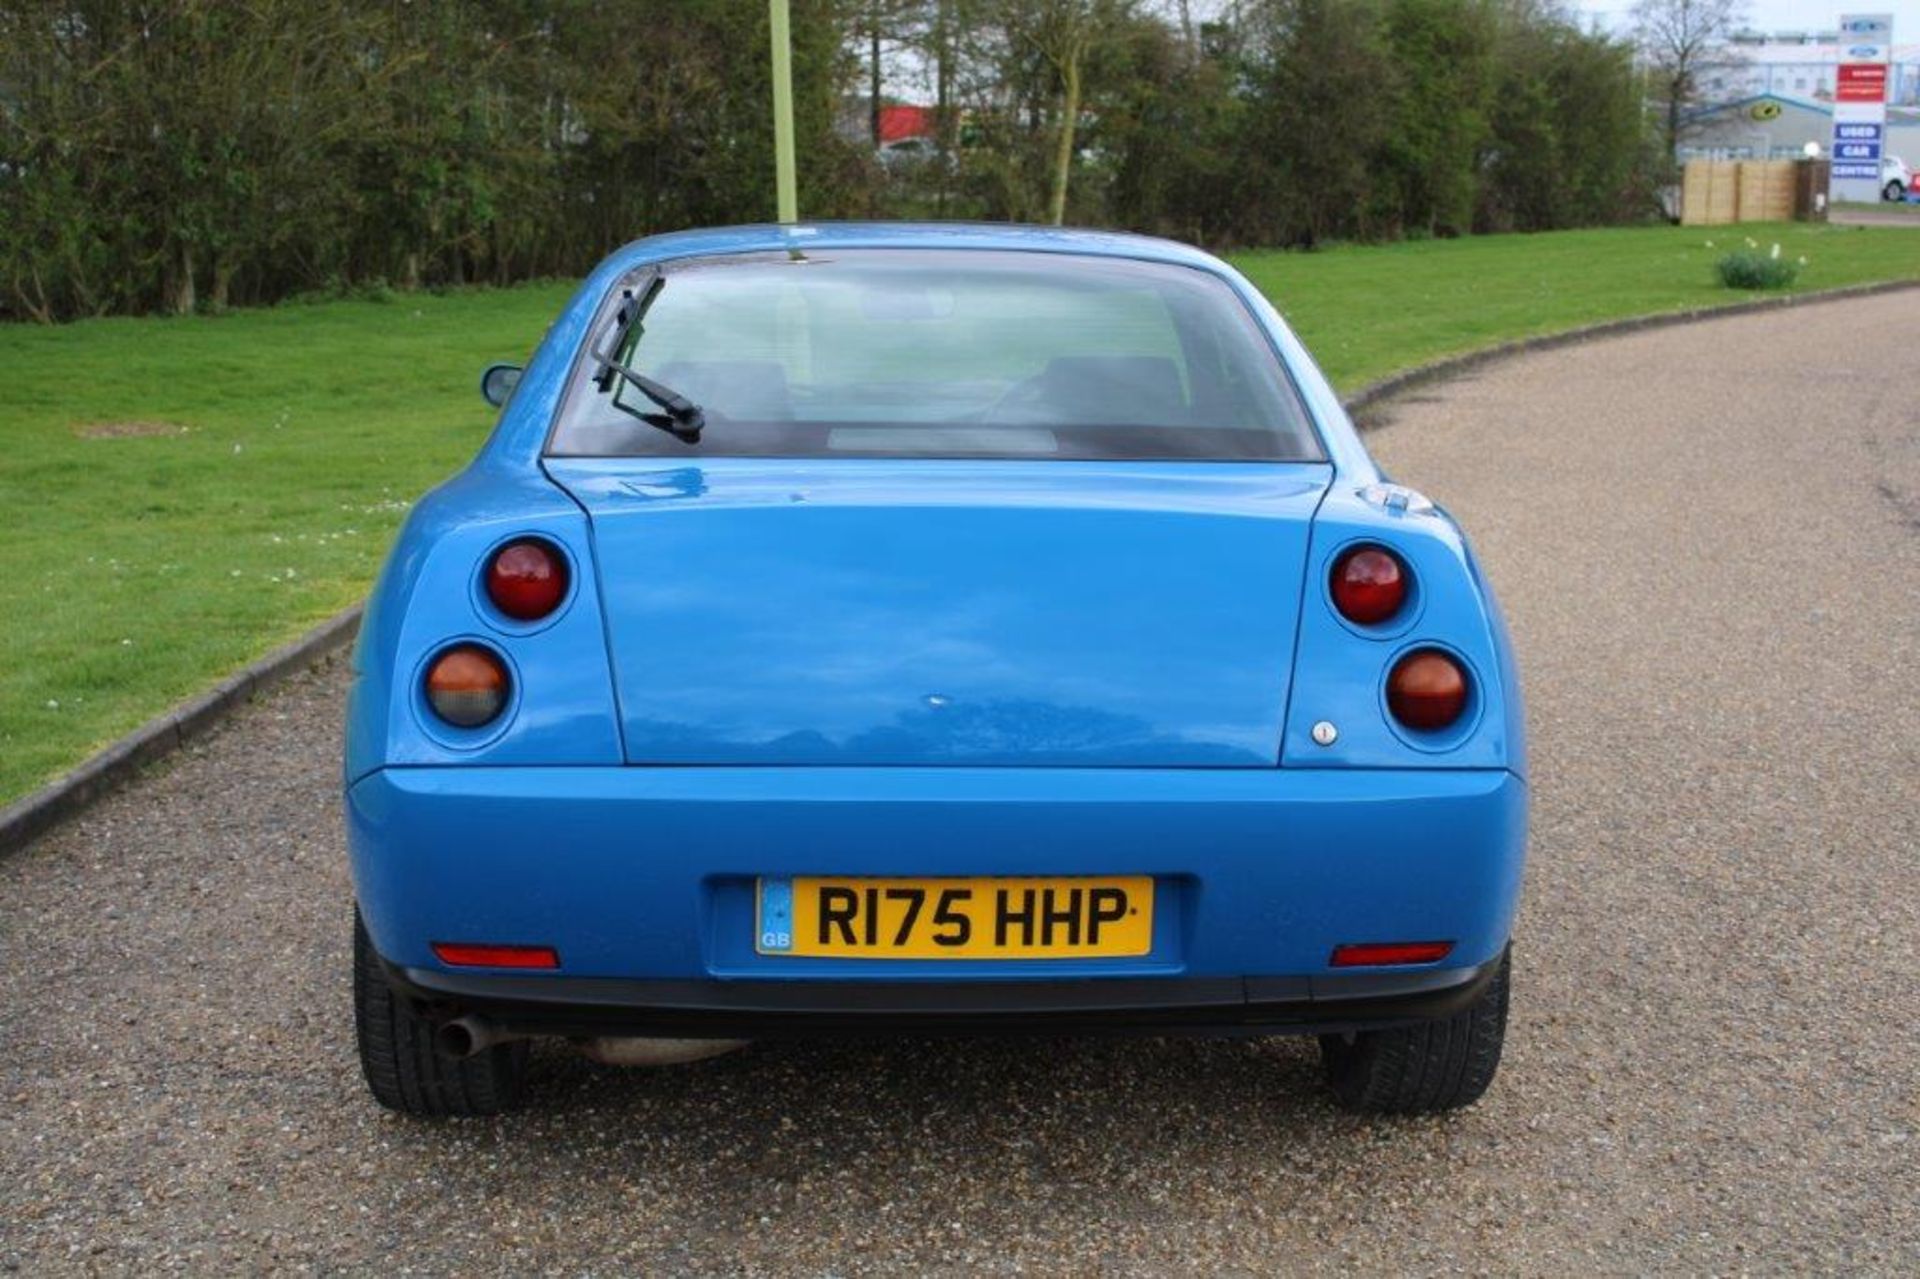 1997 Fiat Coupe 20V Turbo - Image 5 of 13